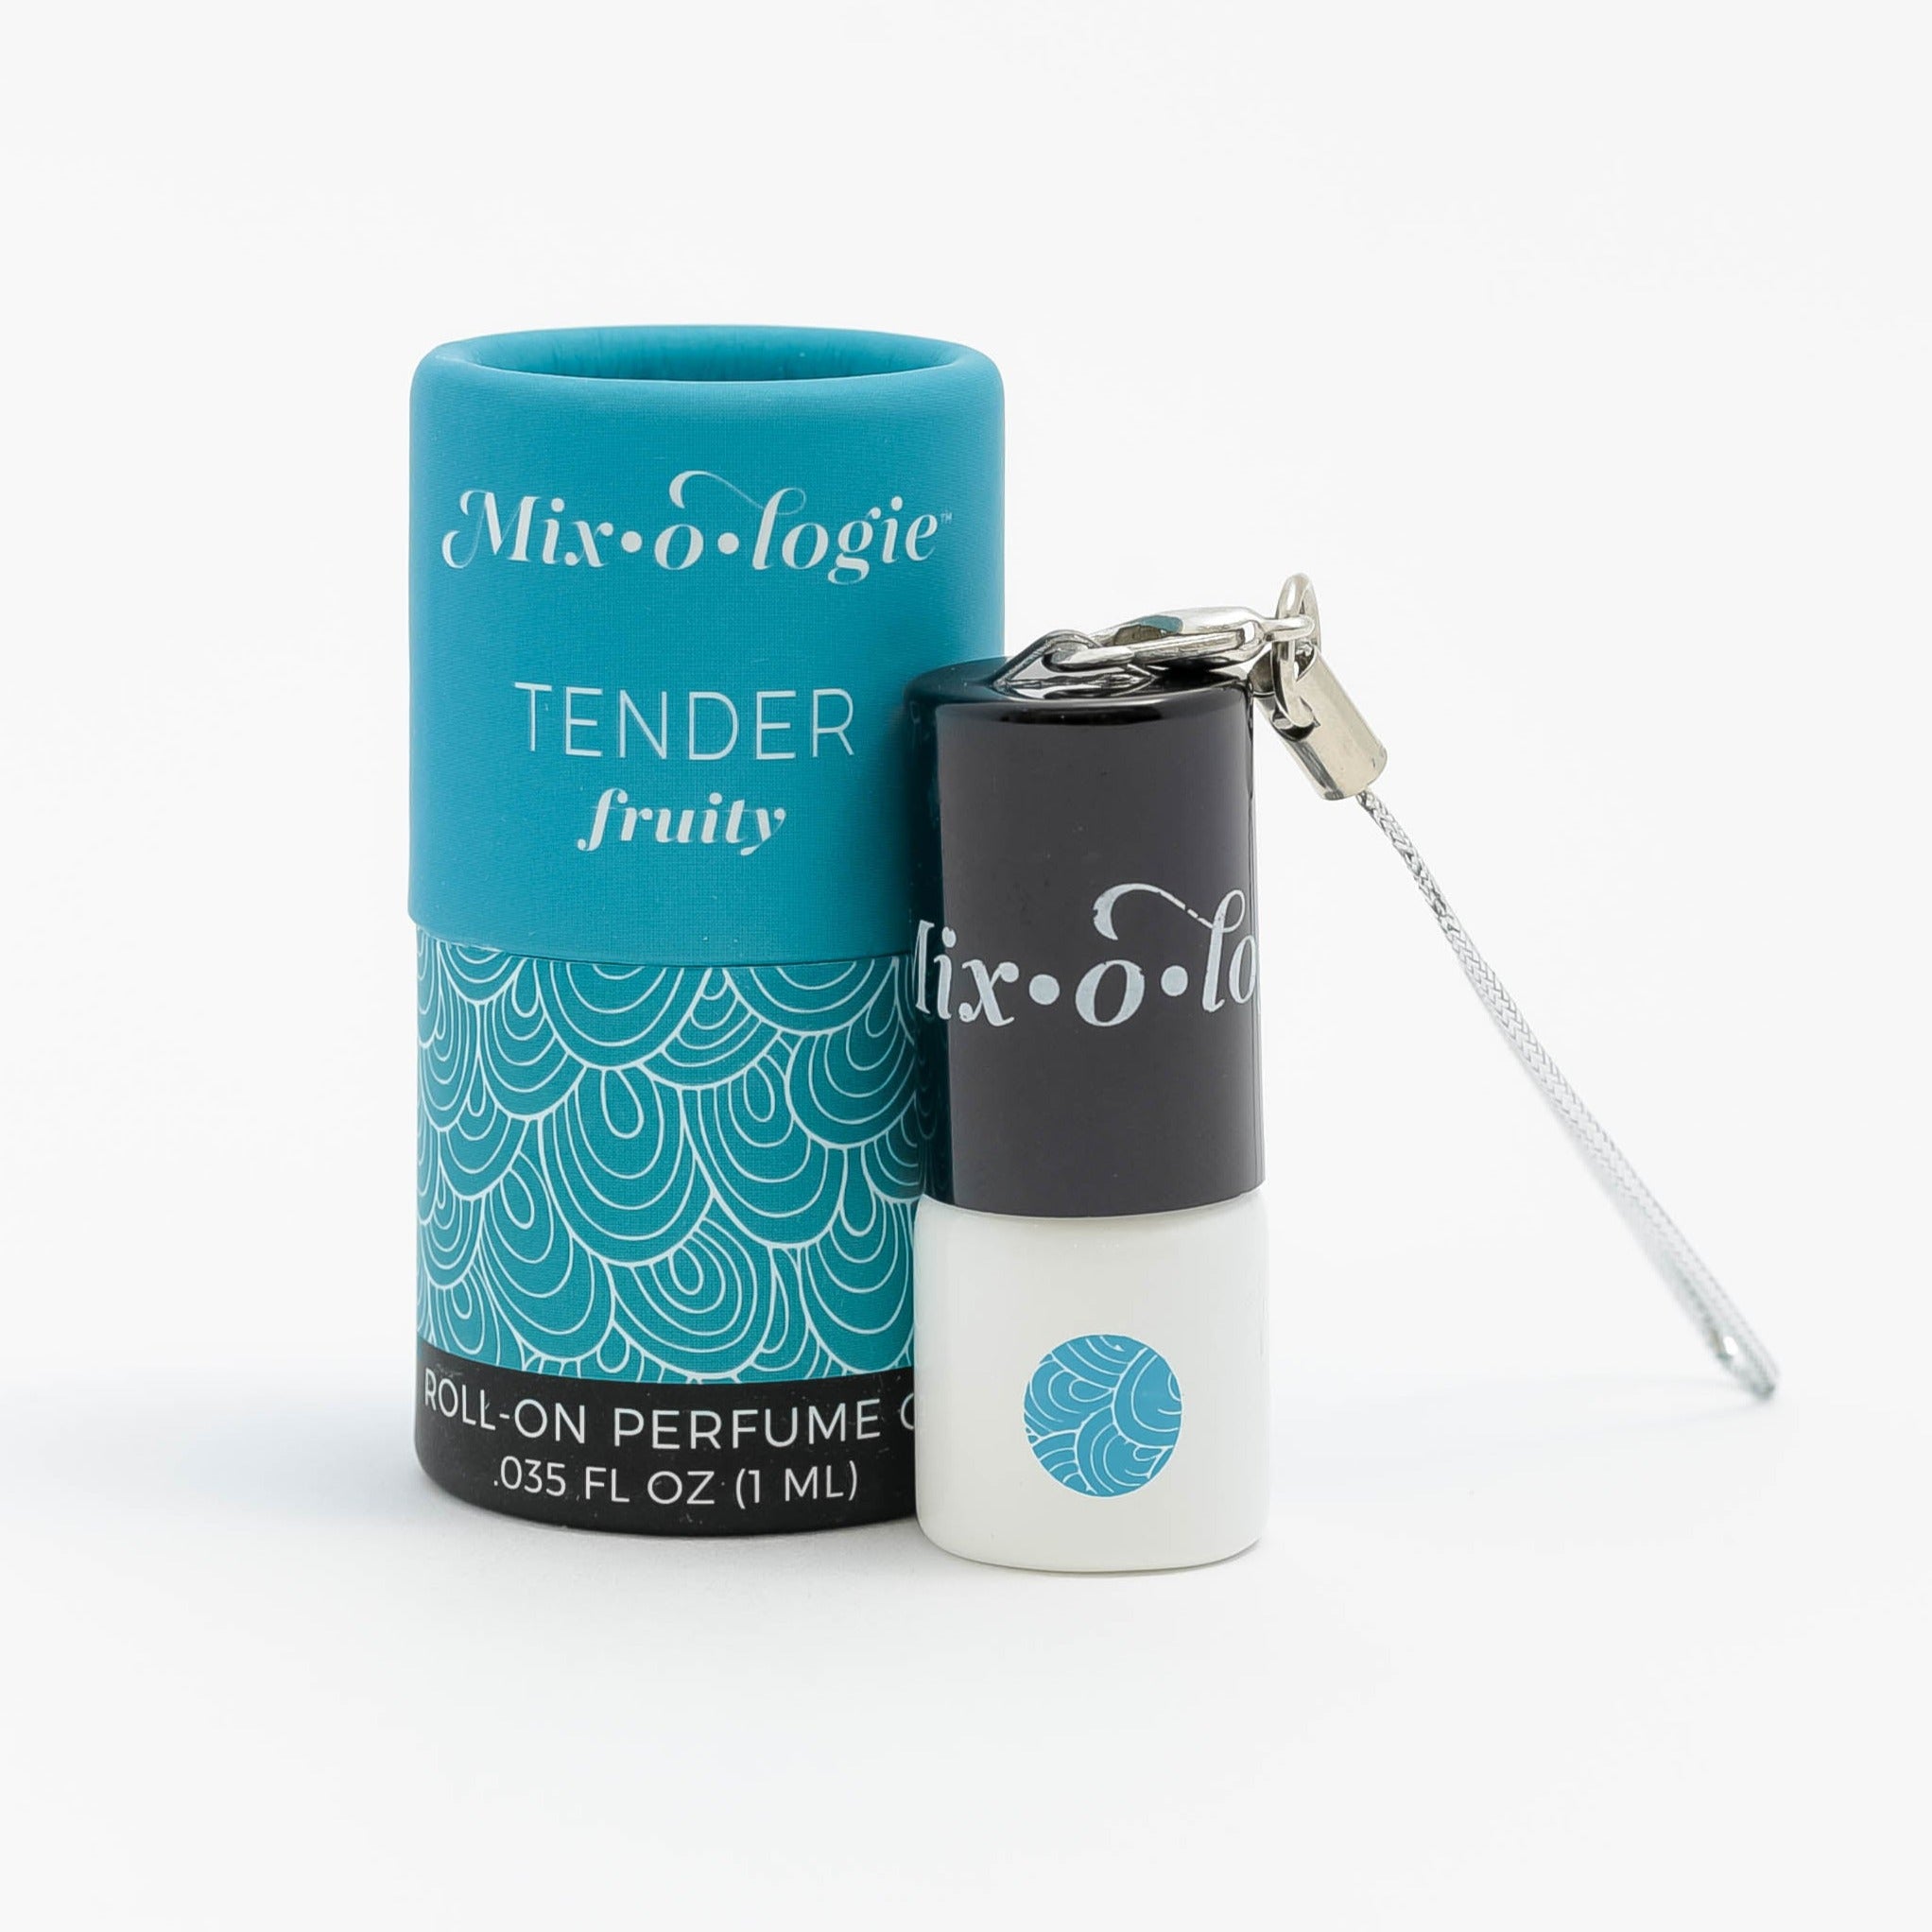 Mixologie's Tender (fruity) scented mini rollerball in 1 mL bottle with keychain lid. Displayed with cylinder packaging.